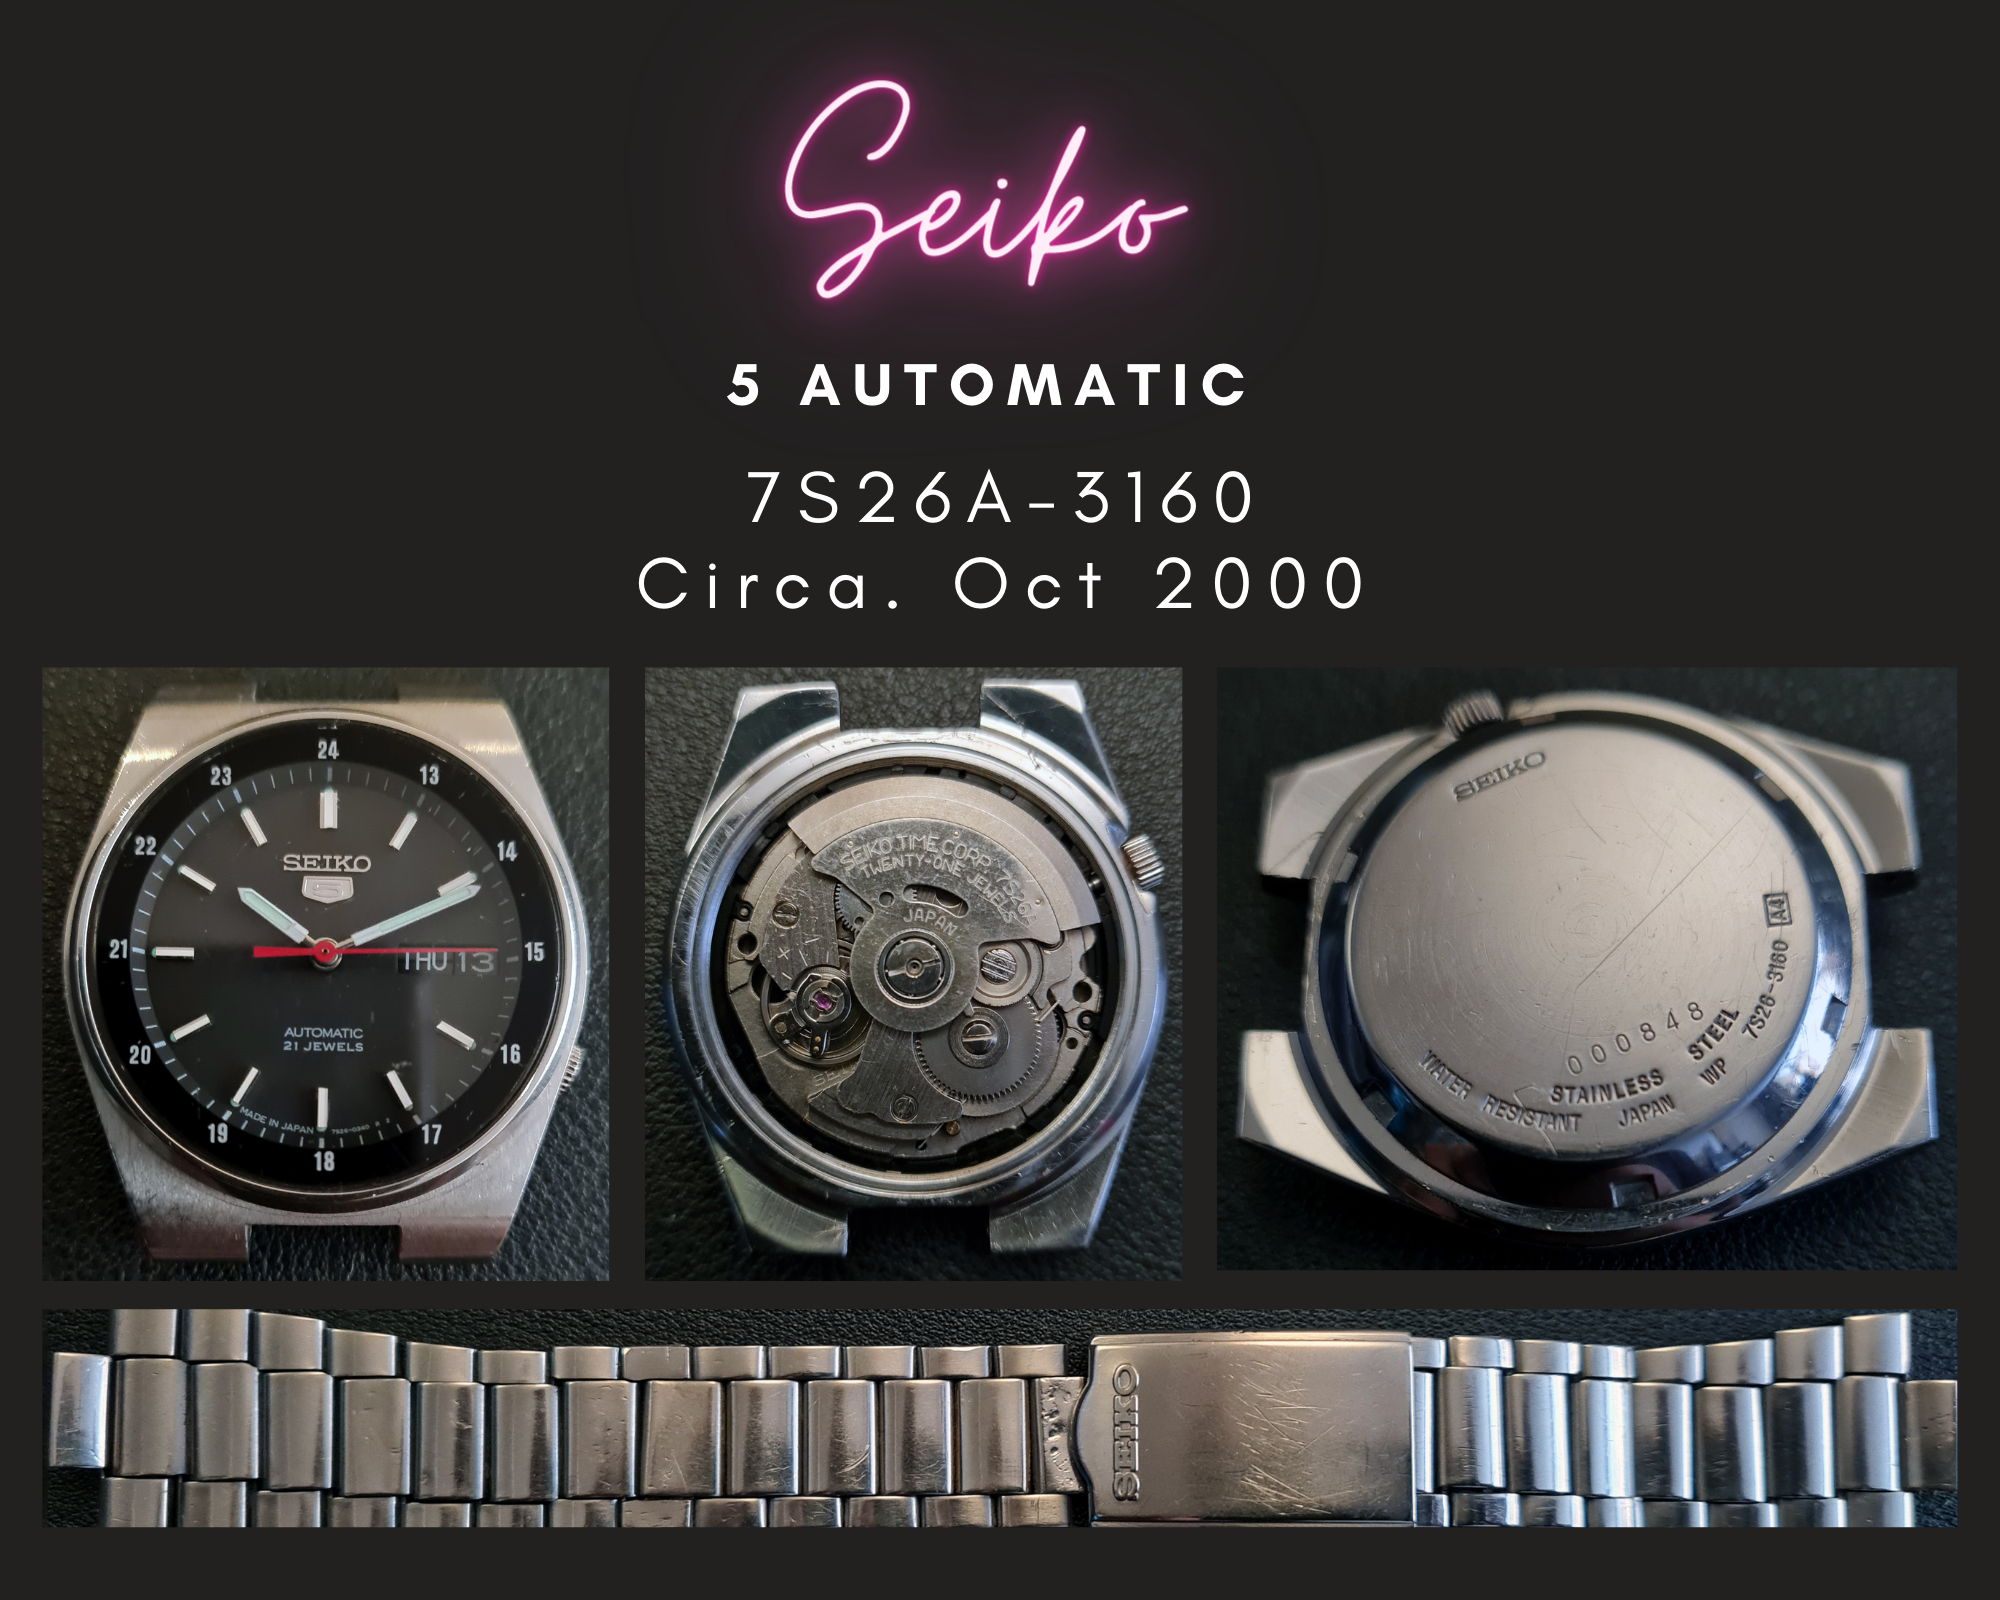 Seiko 5 Automatic | 7S26-3160 | Circa. Oct 2000 | Strip-Down & Re-Build |  The Watch Site